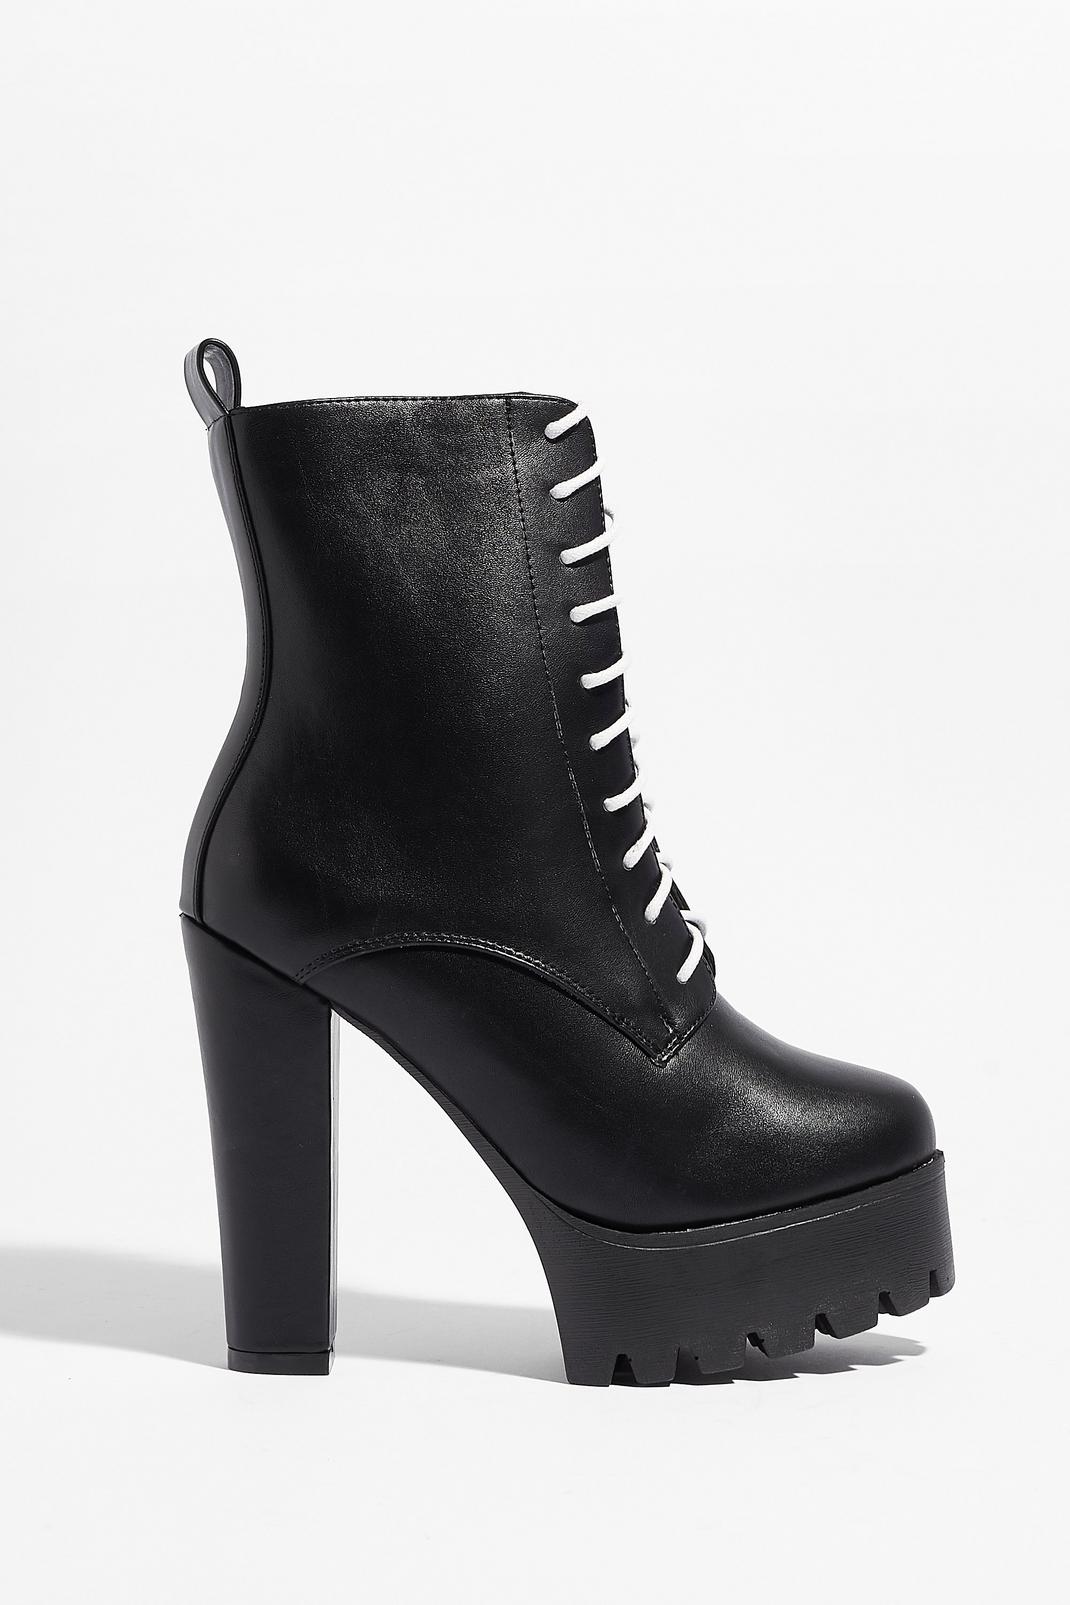 Rise Above It All Faux Leather Platform Boots image number 1